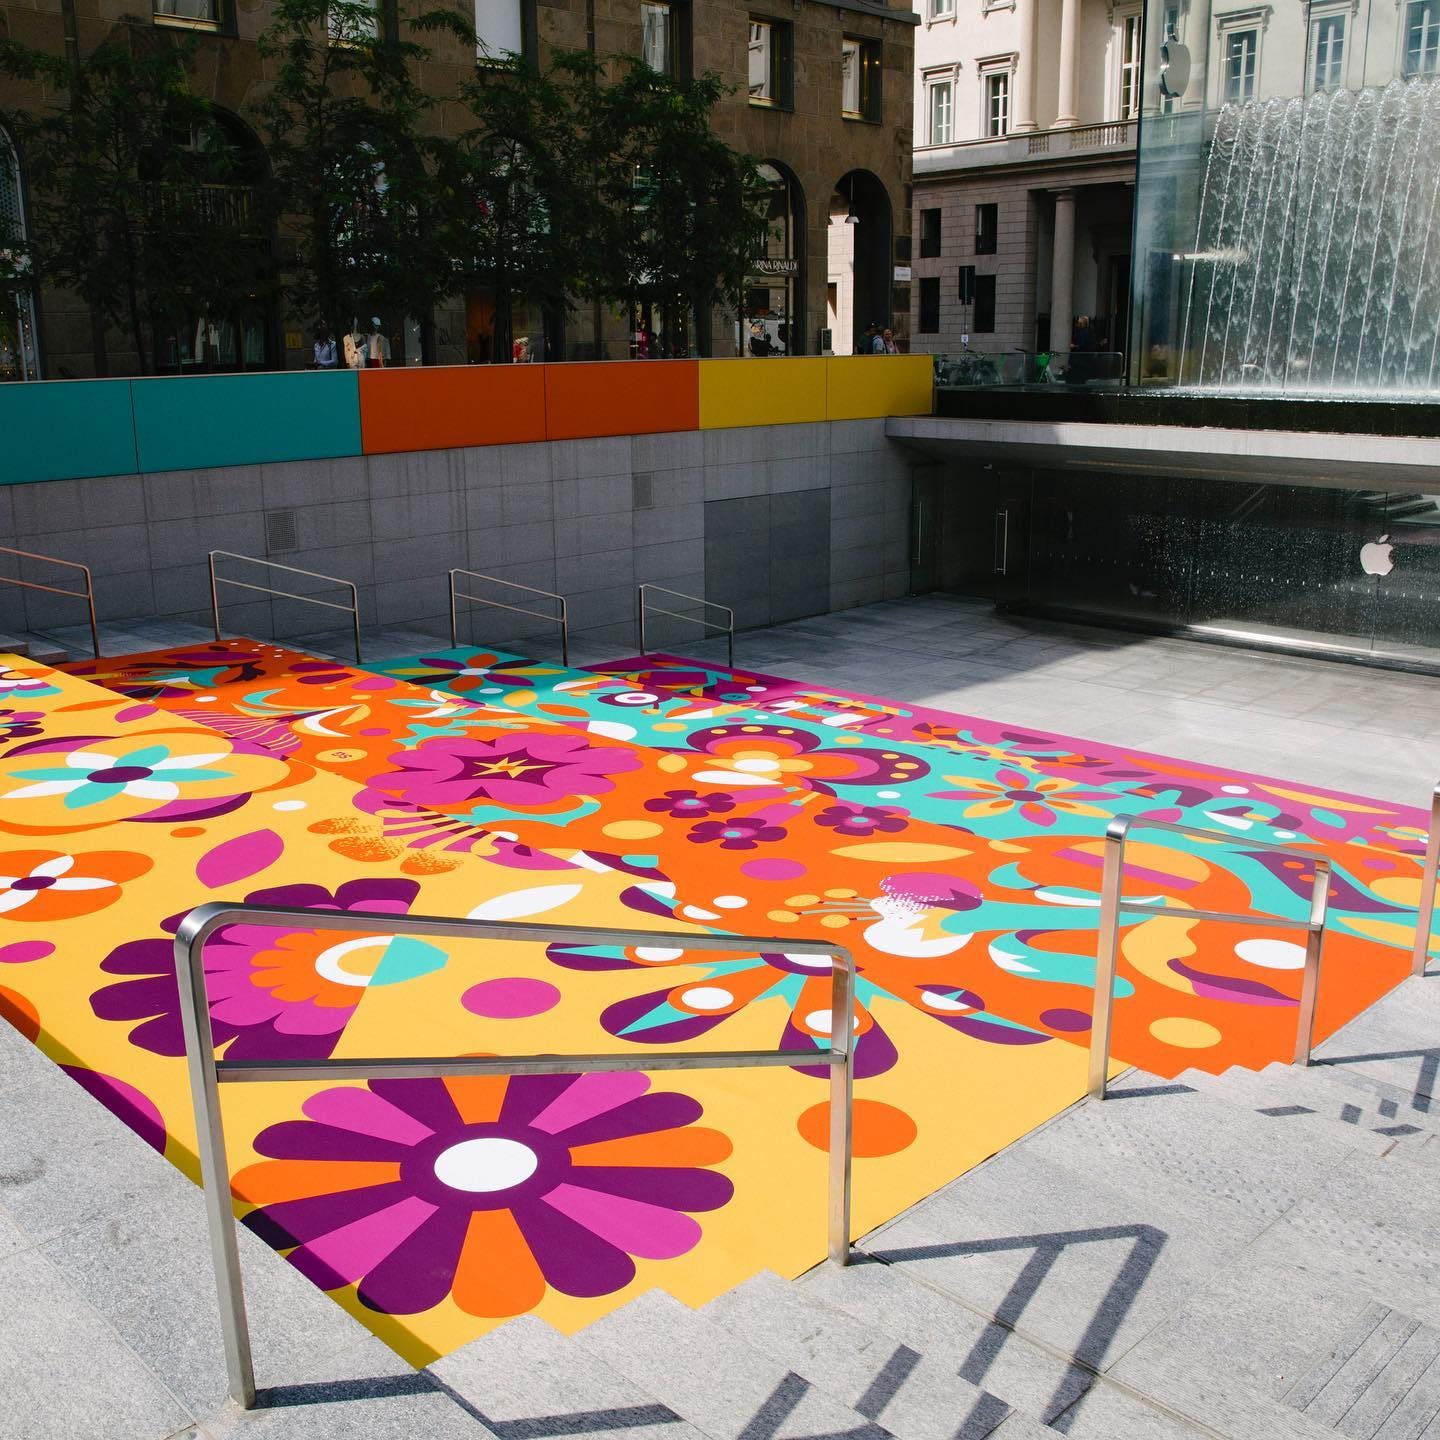 A large, colorful mural covers the amphitheater stairs at Apple Piazza Liberty.